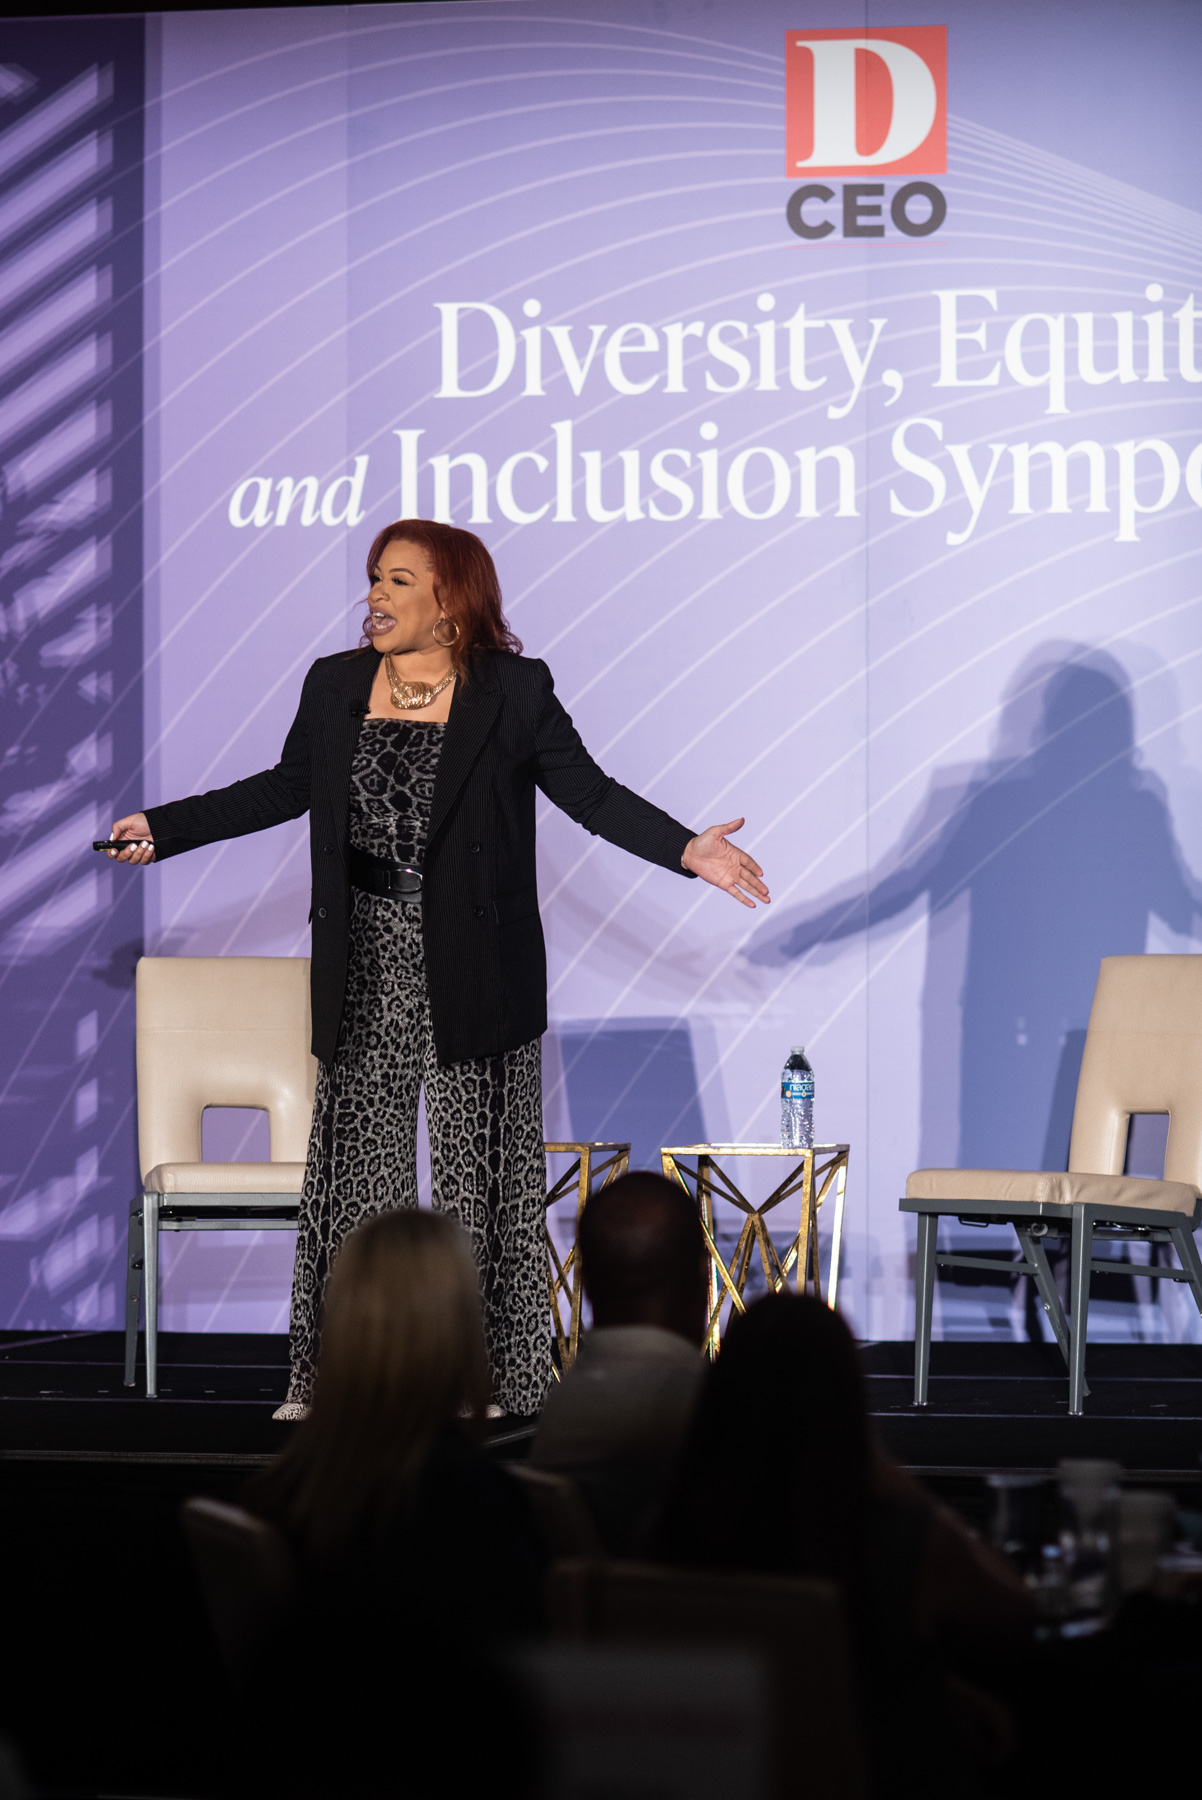 Scenes from D CEO’s 2021 Diversity, Equity, and Inclusion Symposium